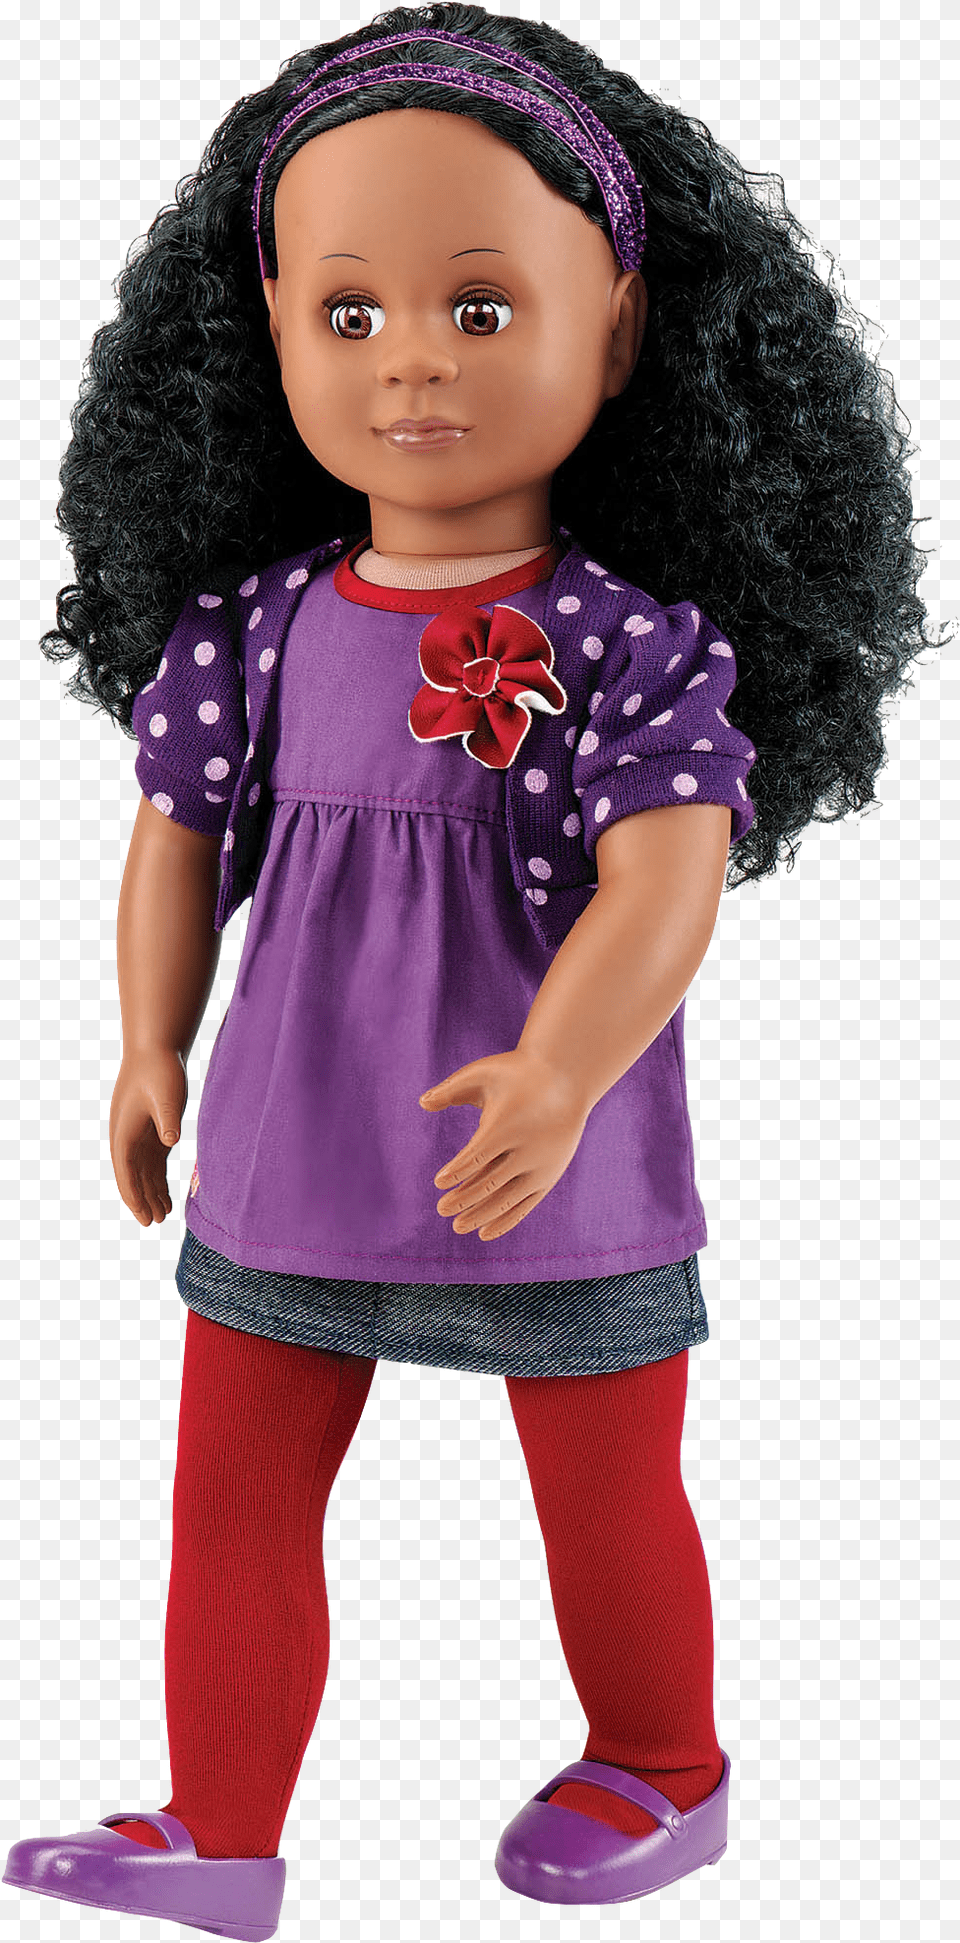 Abrianna Our Generation Doll, Toy, Child, Female, Girl Png Image